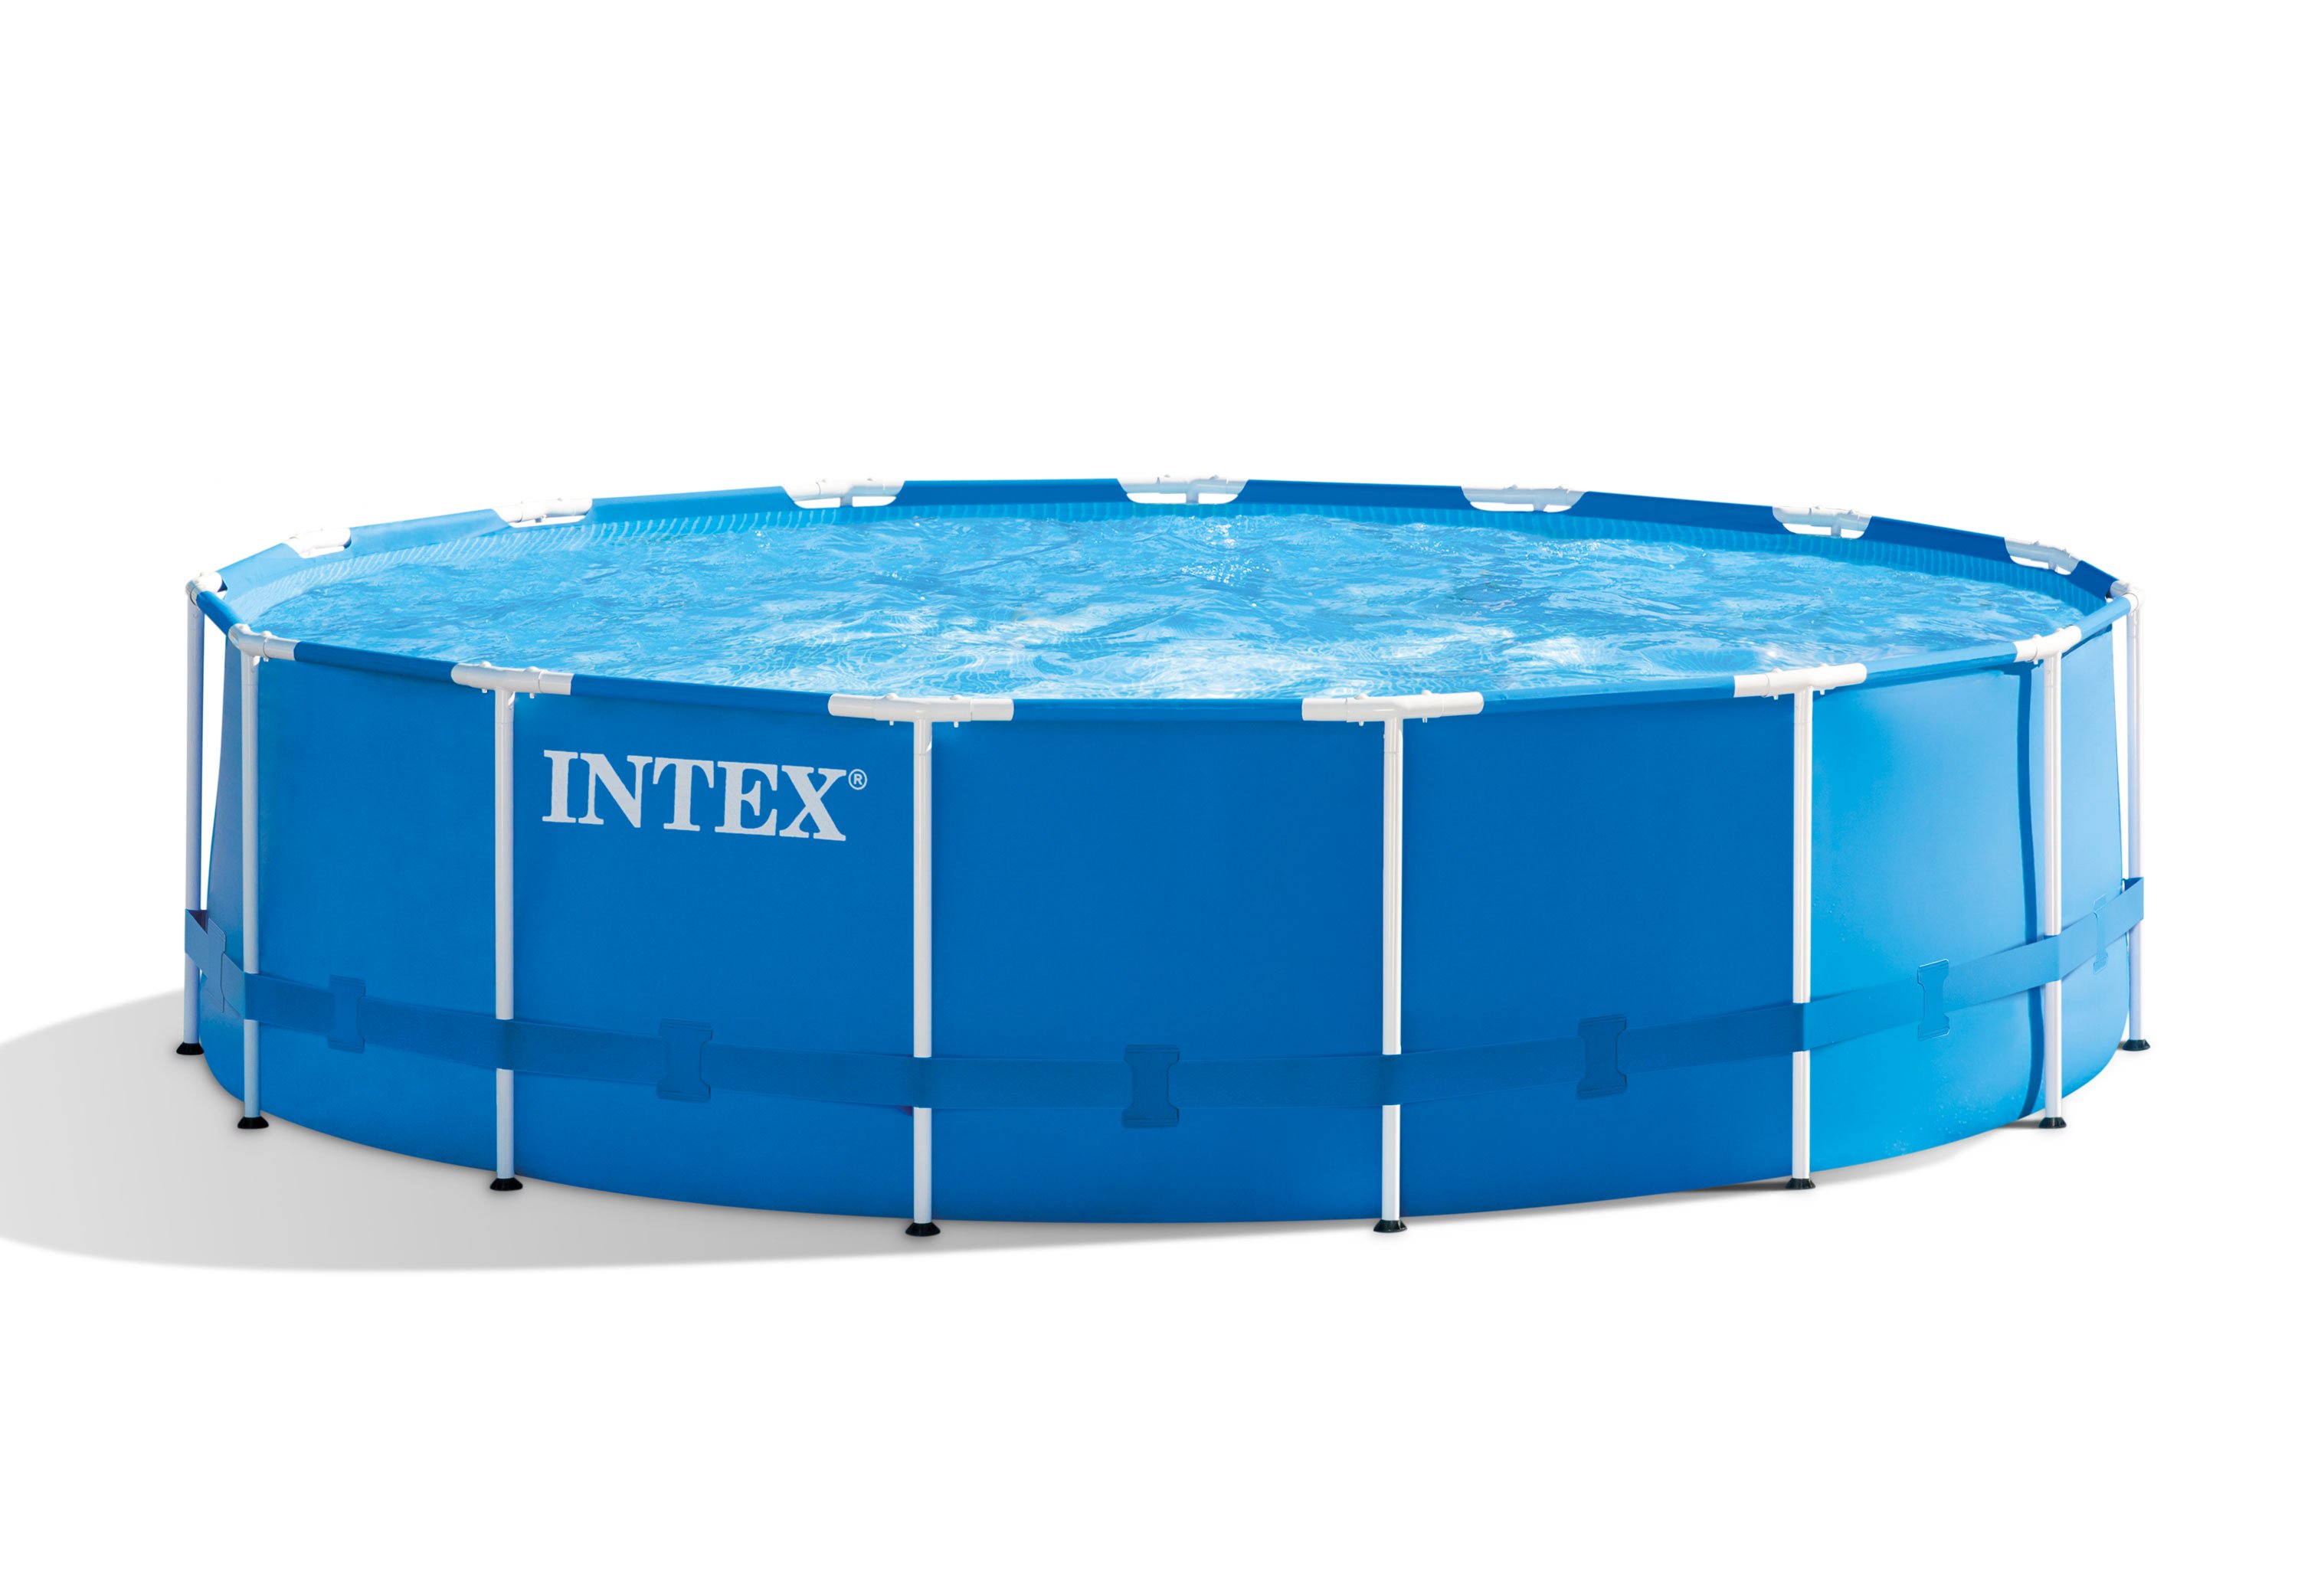 Intex 15' x 48" Metal Frame Above Ground Pool with Filter Pump - image 1 of 7